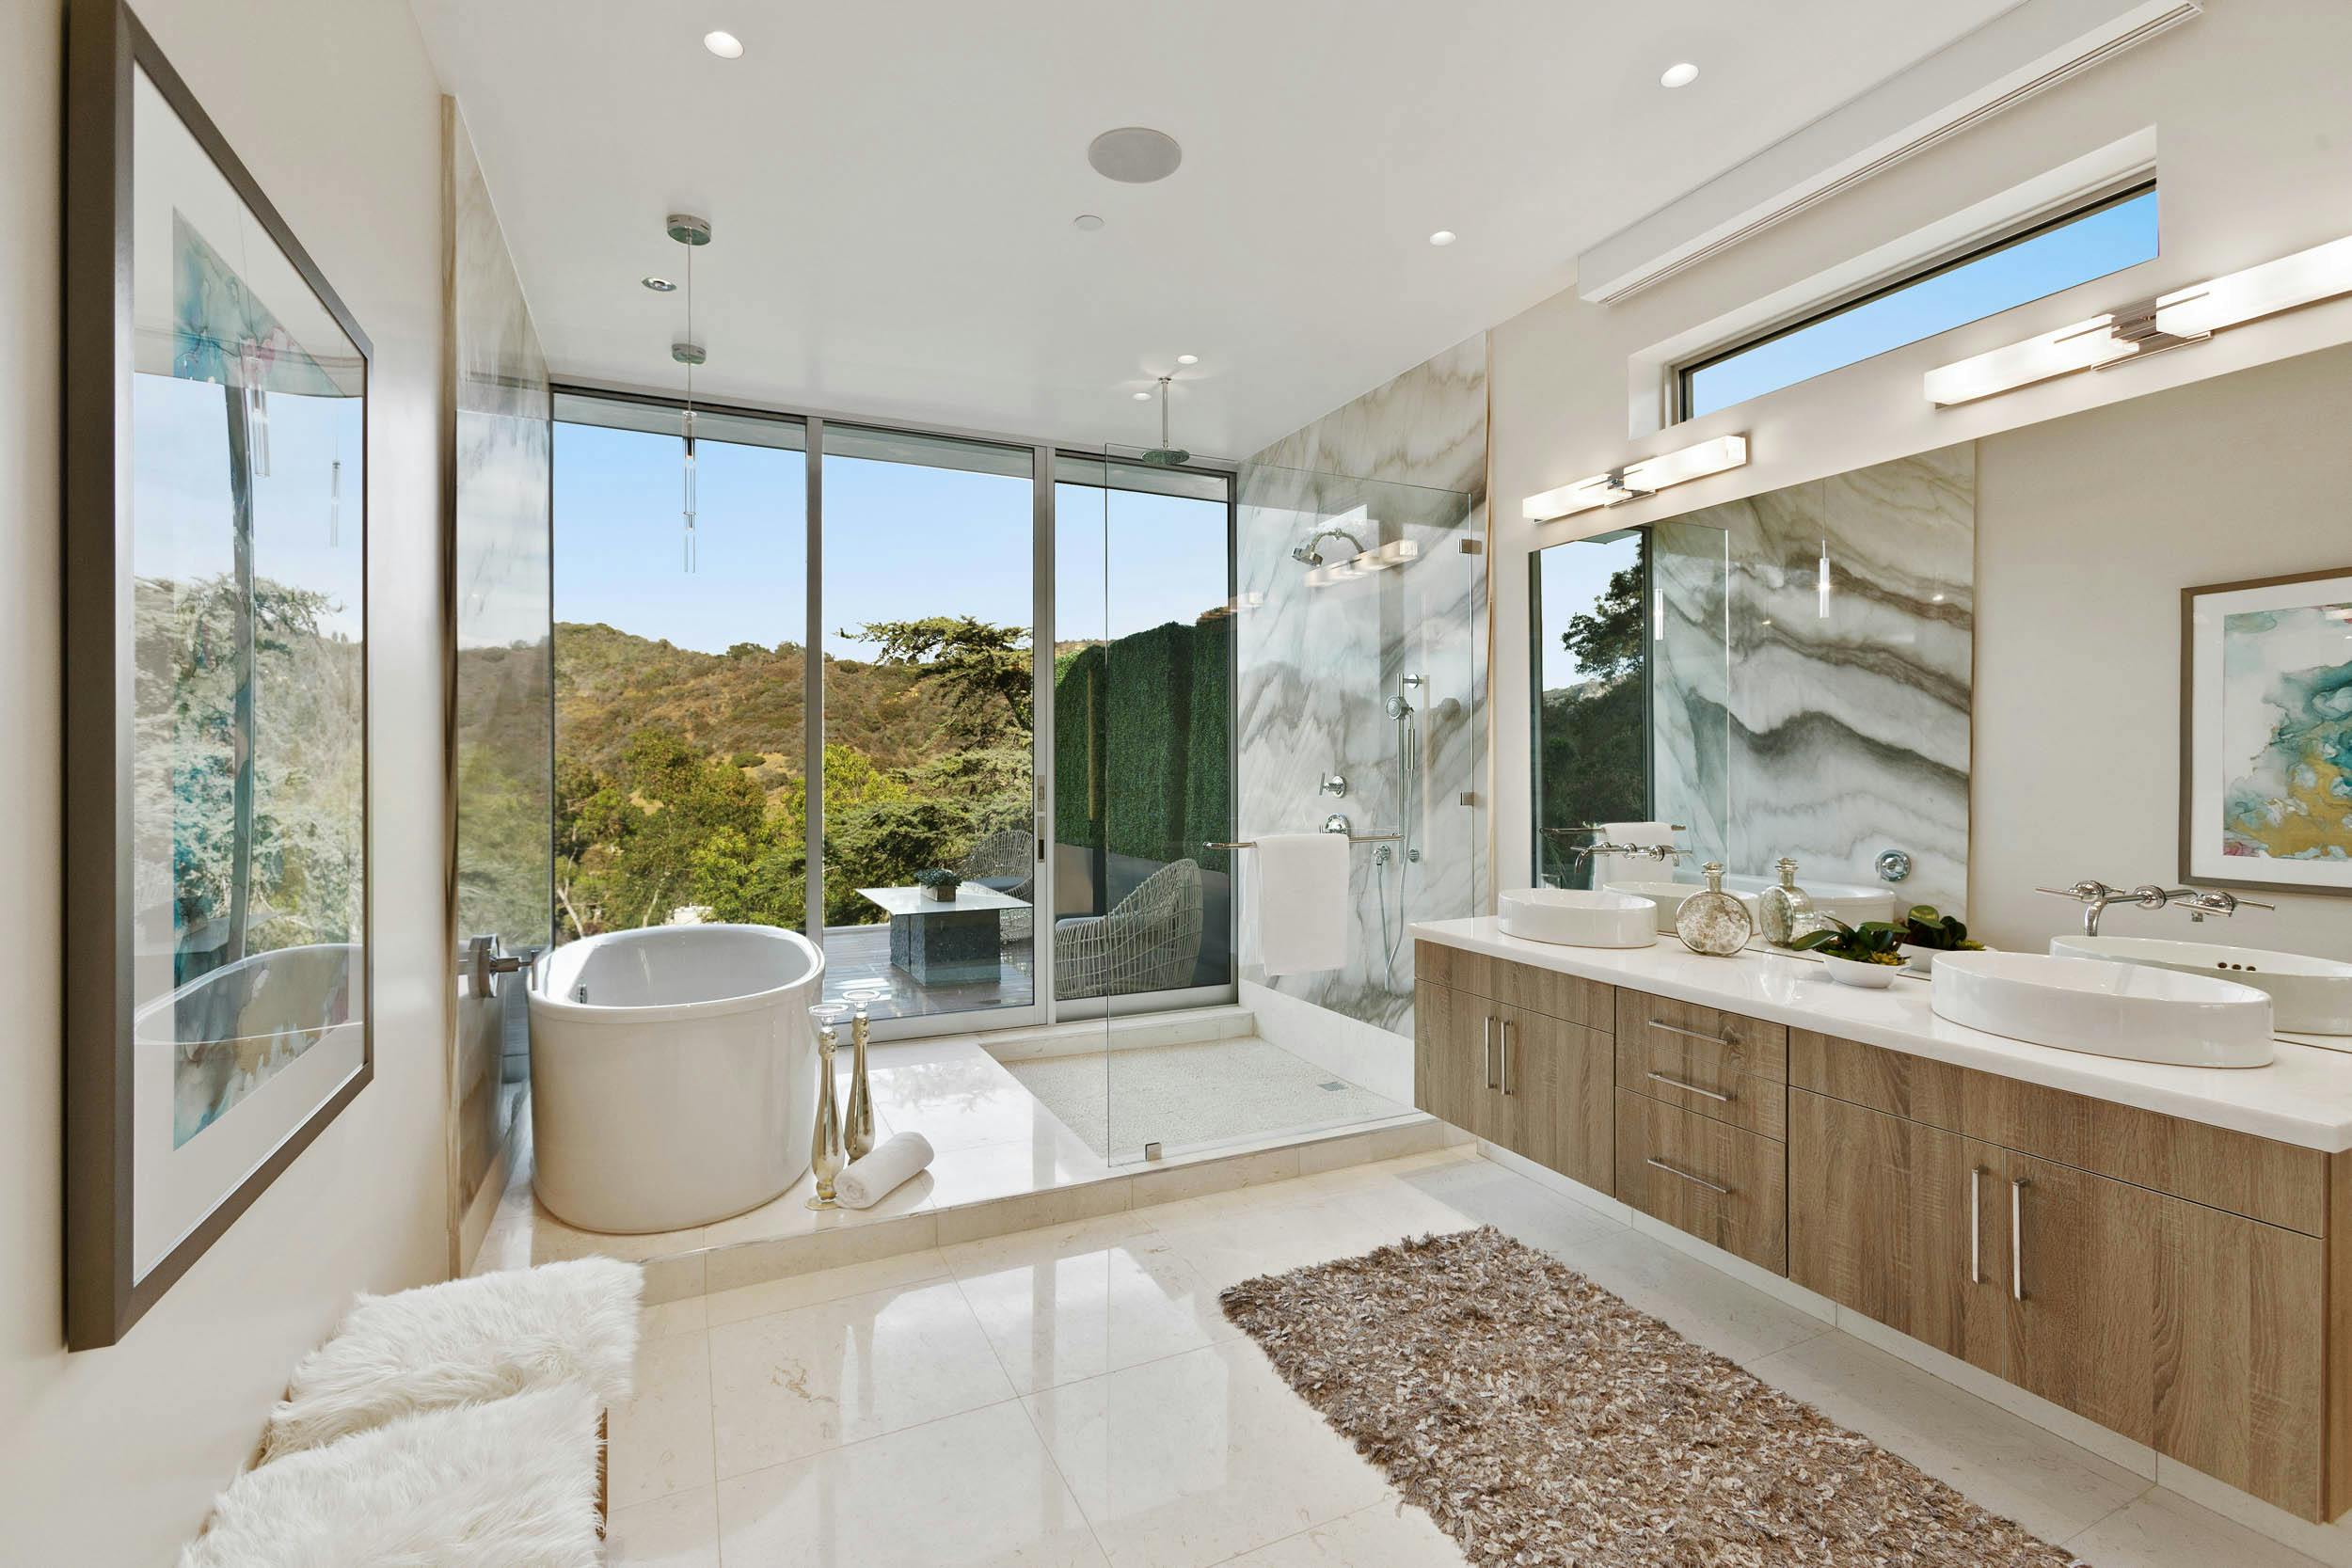 Luxuy Bathrooms can be costly, but oh so spa-cious.